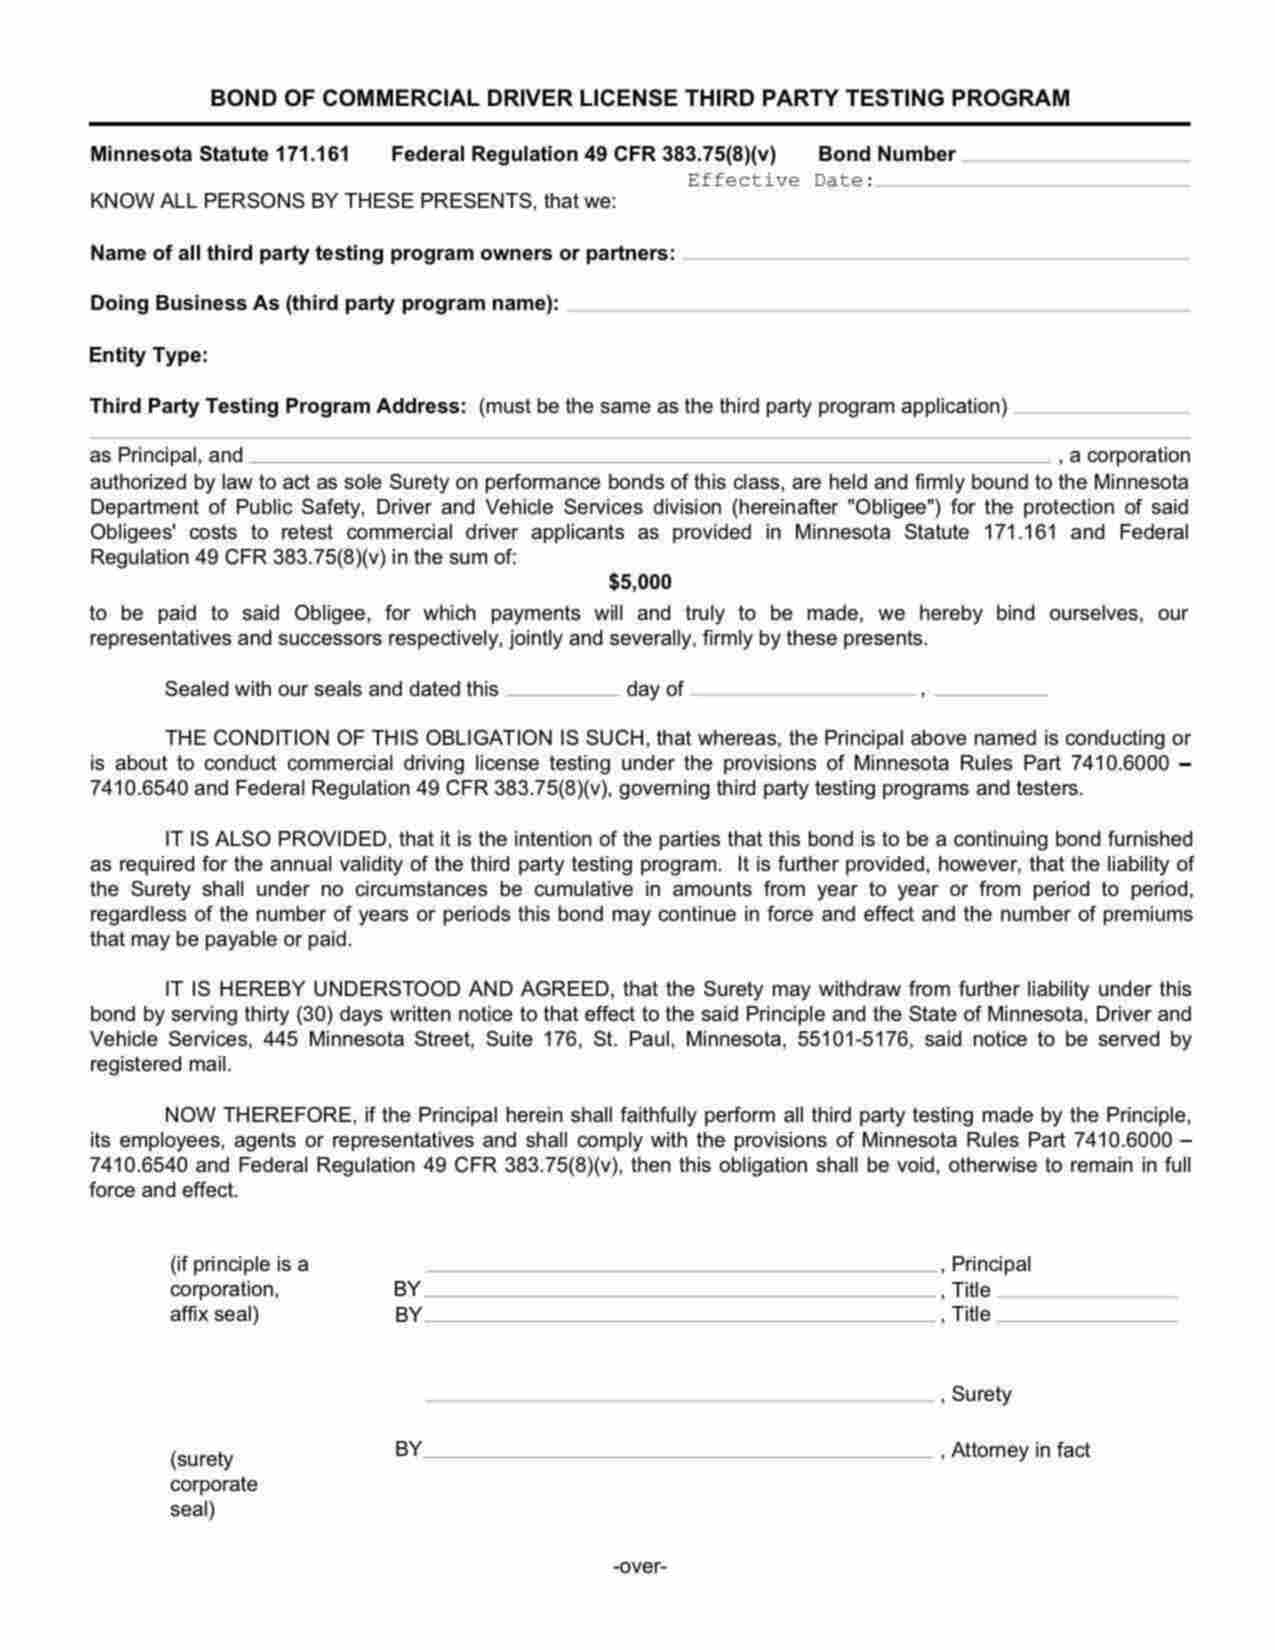 Minnesota Commercial Driver License (CDL) Third Party Tester Bond Form